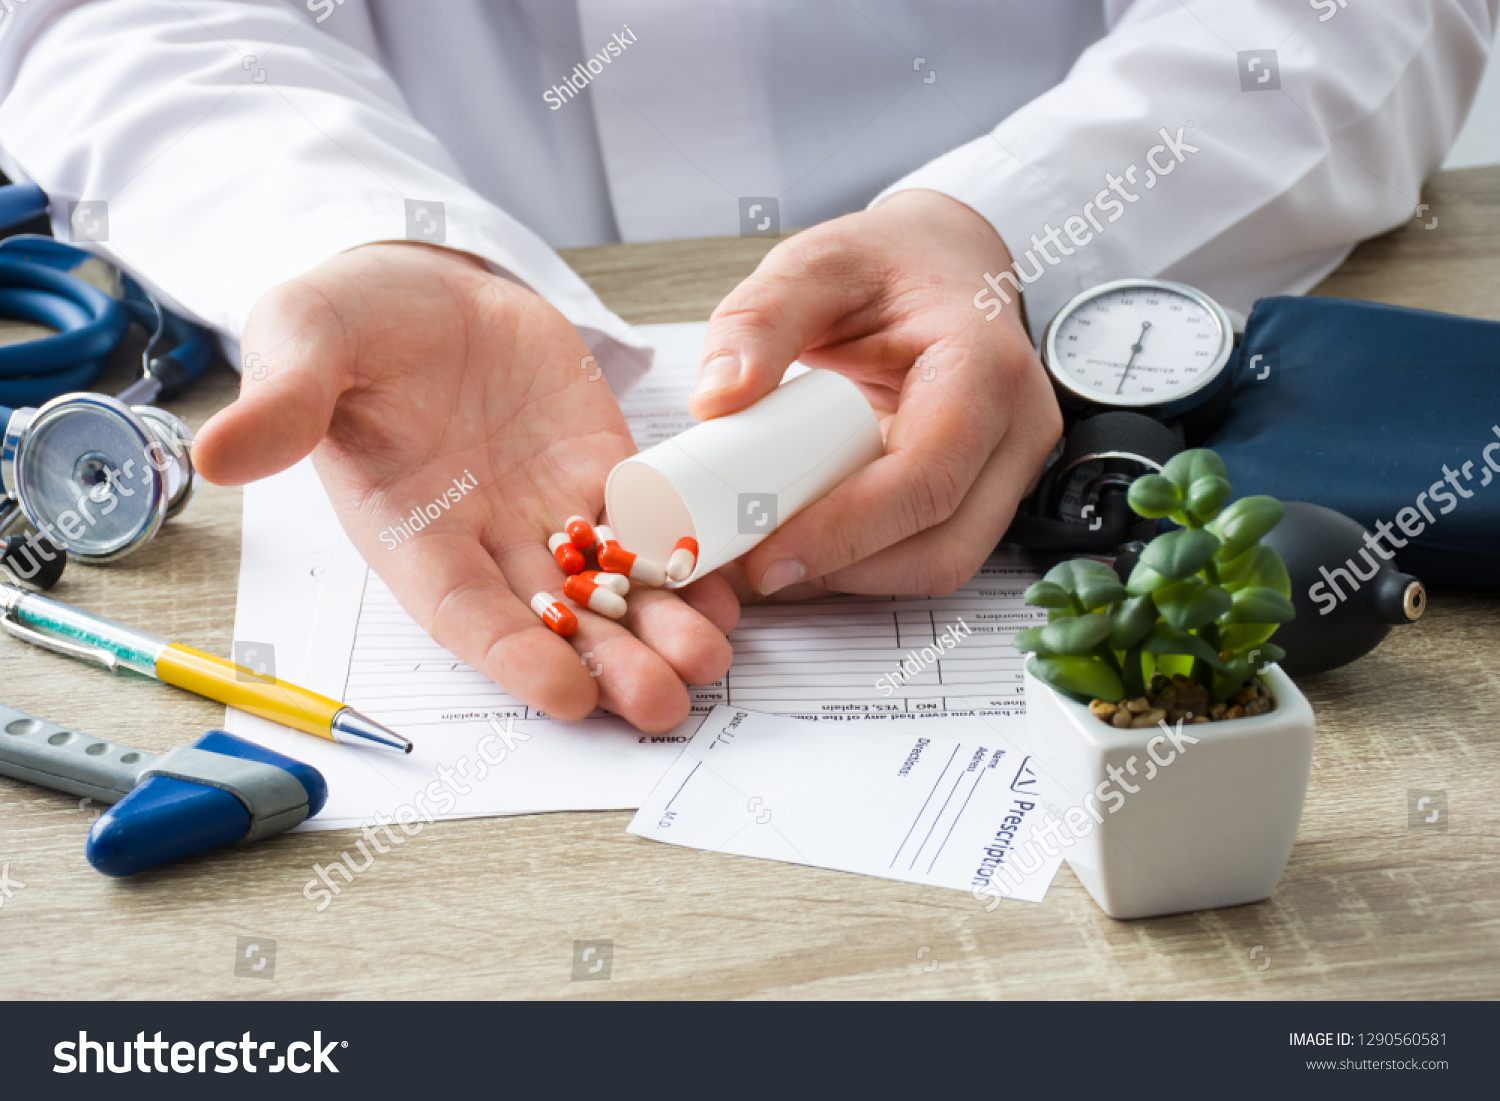 At doctors appointment physician shows patient capsules, which emptied into hand from container with focus on hand with drugs. Scene of prescription generic or OTC medications by doctor on visit #1290560581